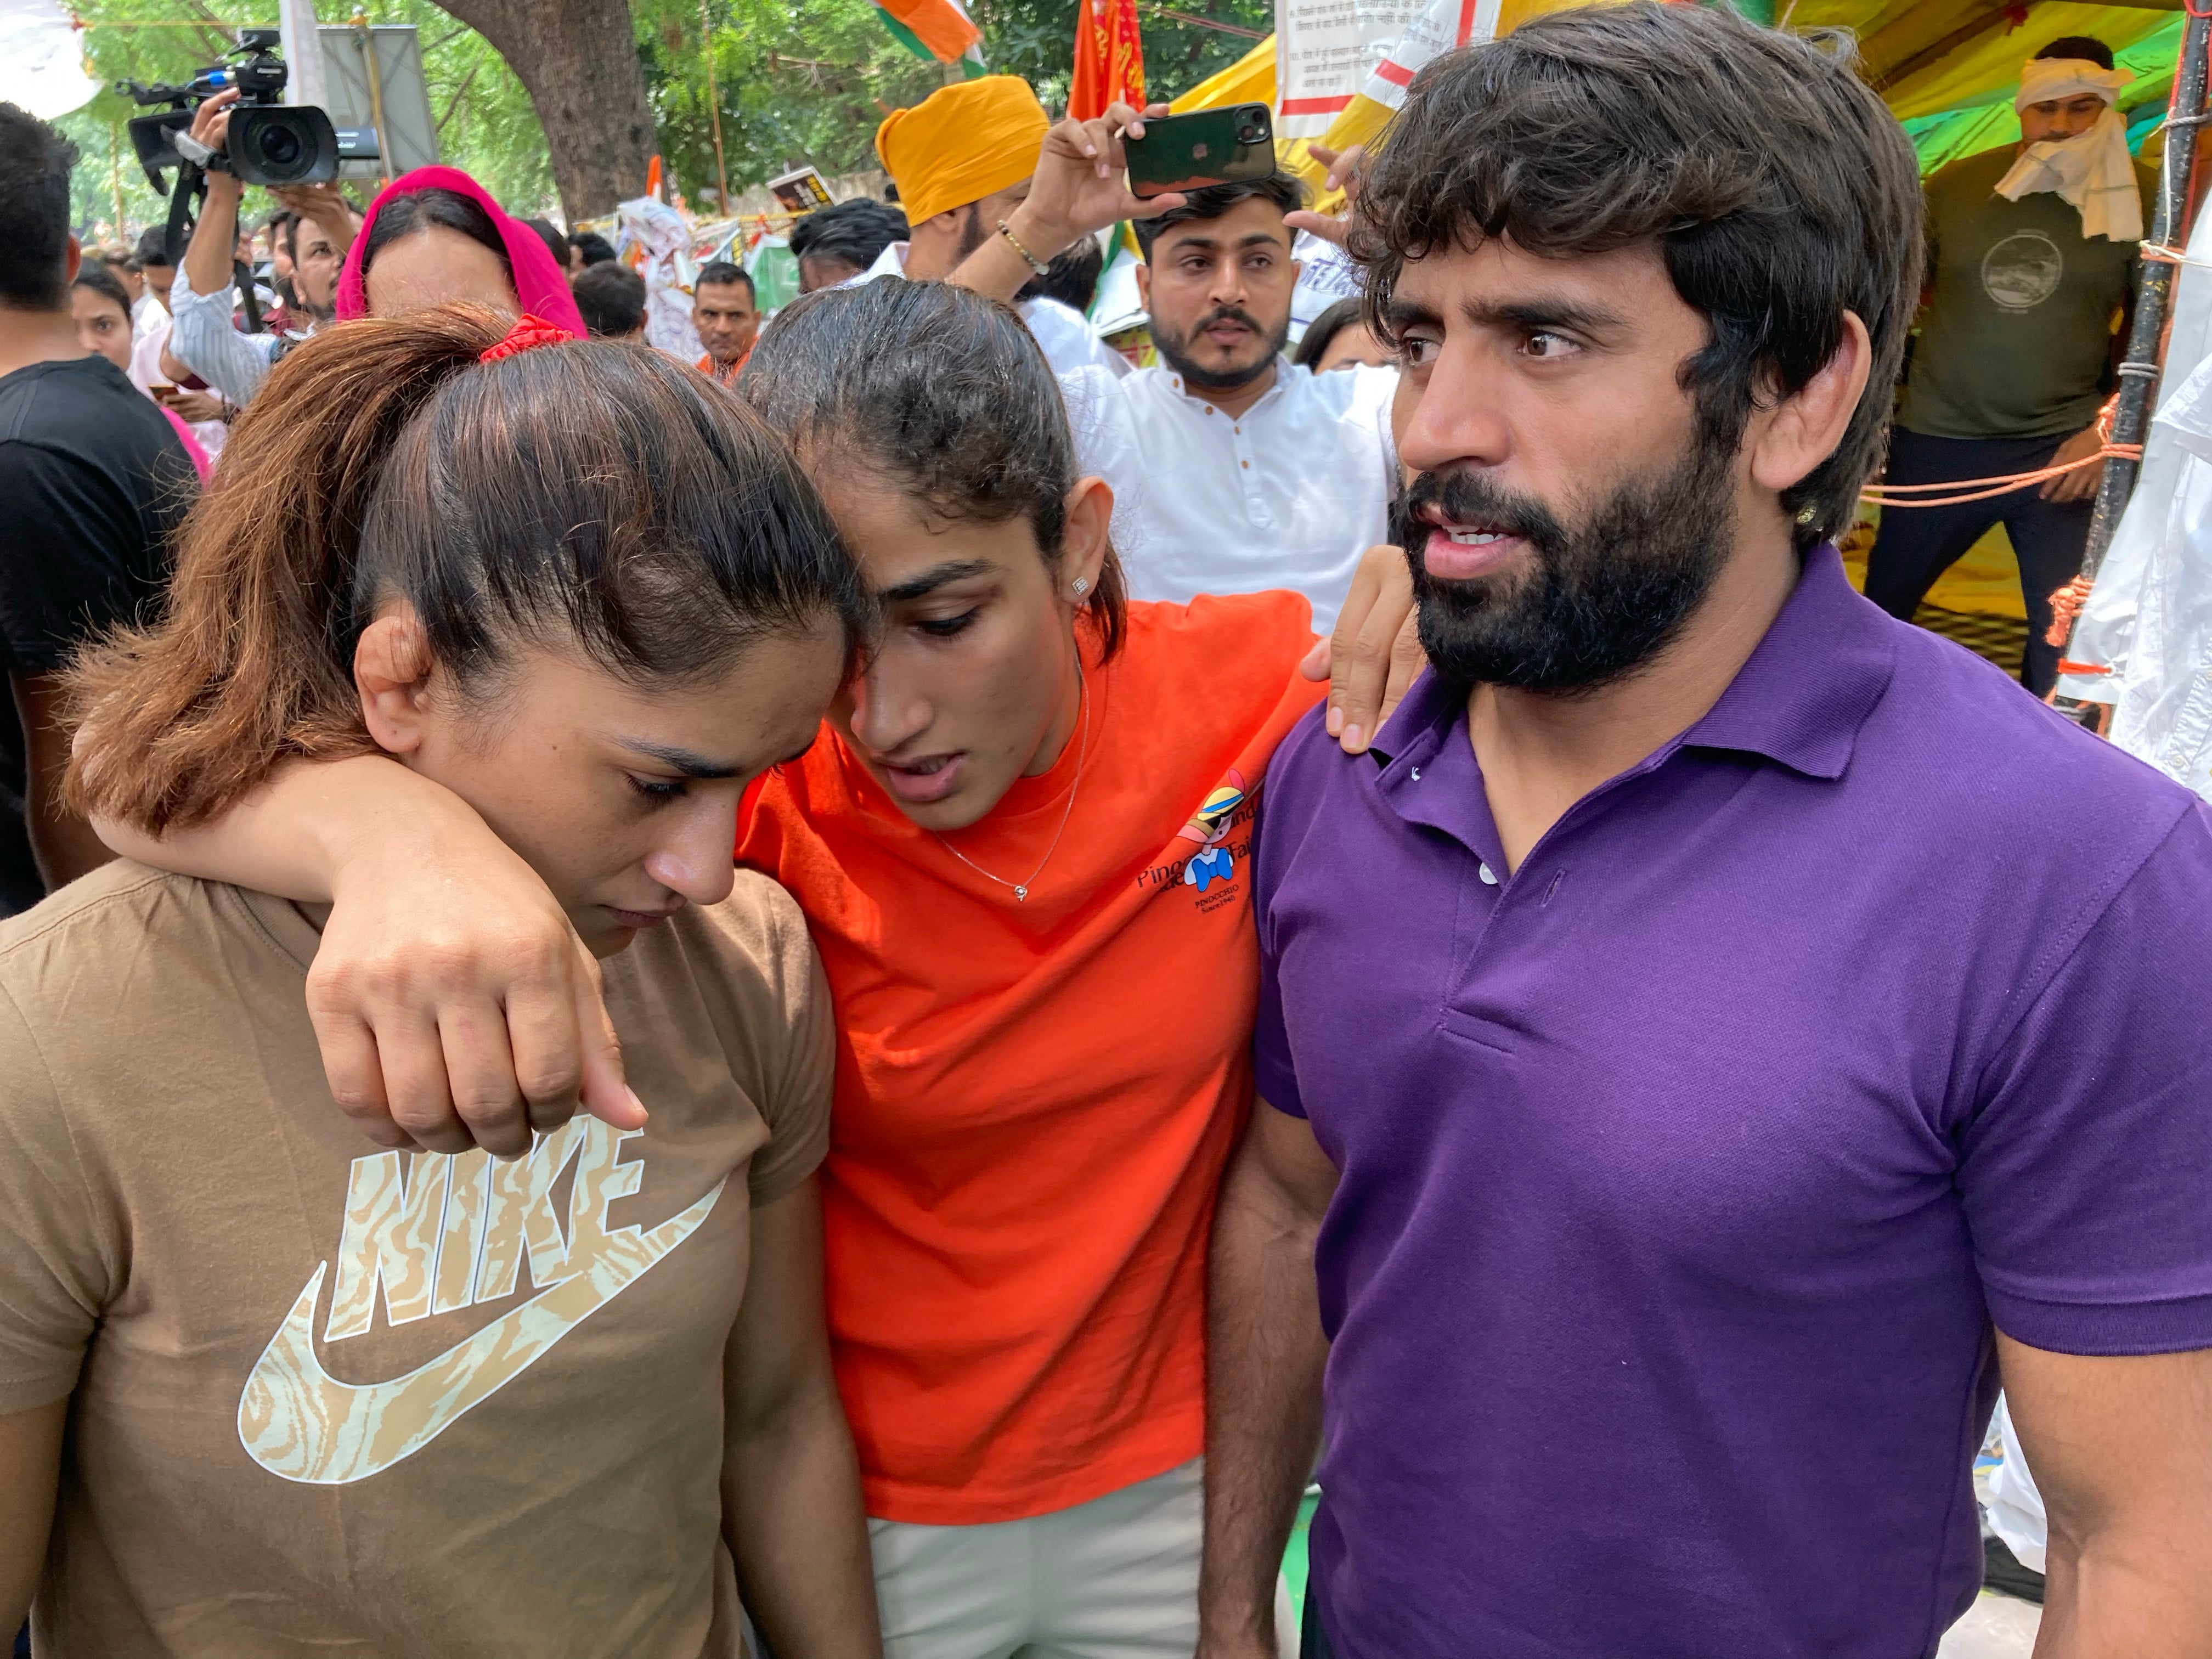 Indian wrestlers (from right) Bajrang Punia, Sangita Phogat and Vinesh Phogat talk to each other ahead of their protest march